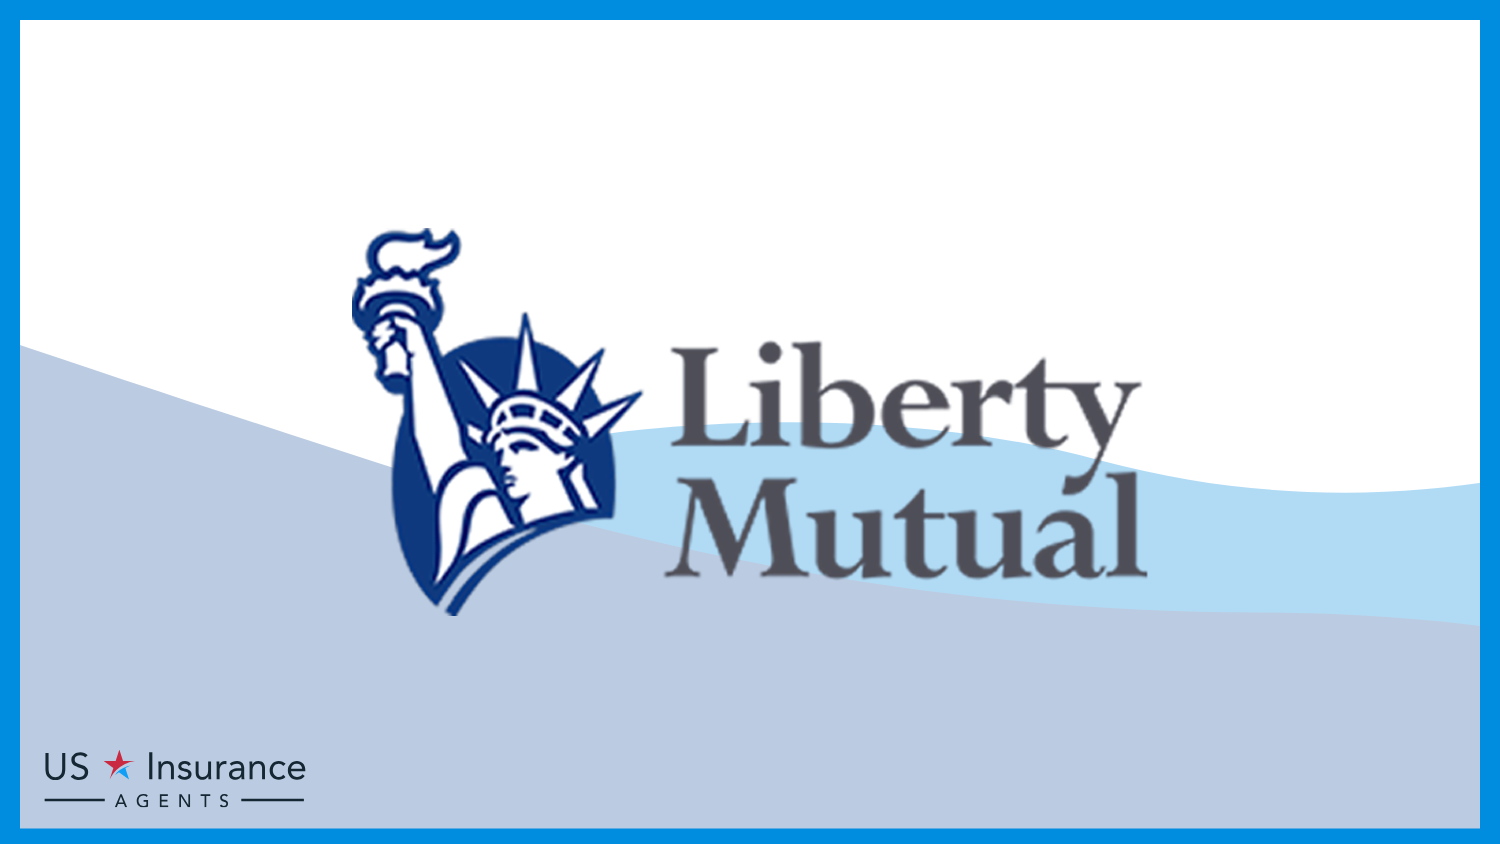 Liberty Mutual: Best Business Insurance for Tour Companies